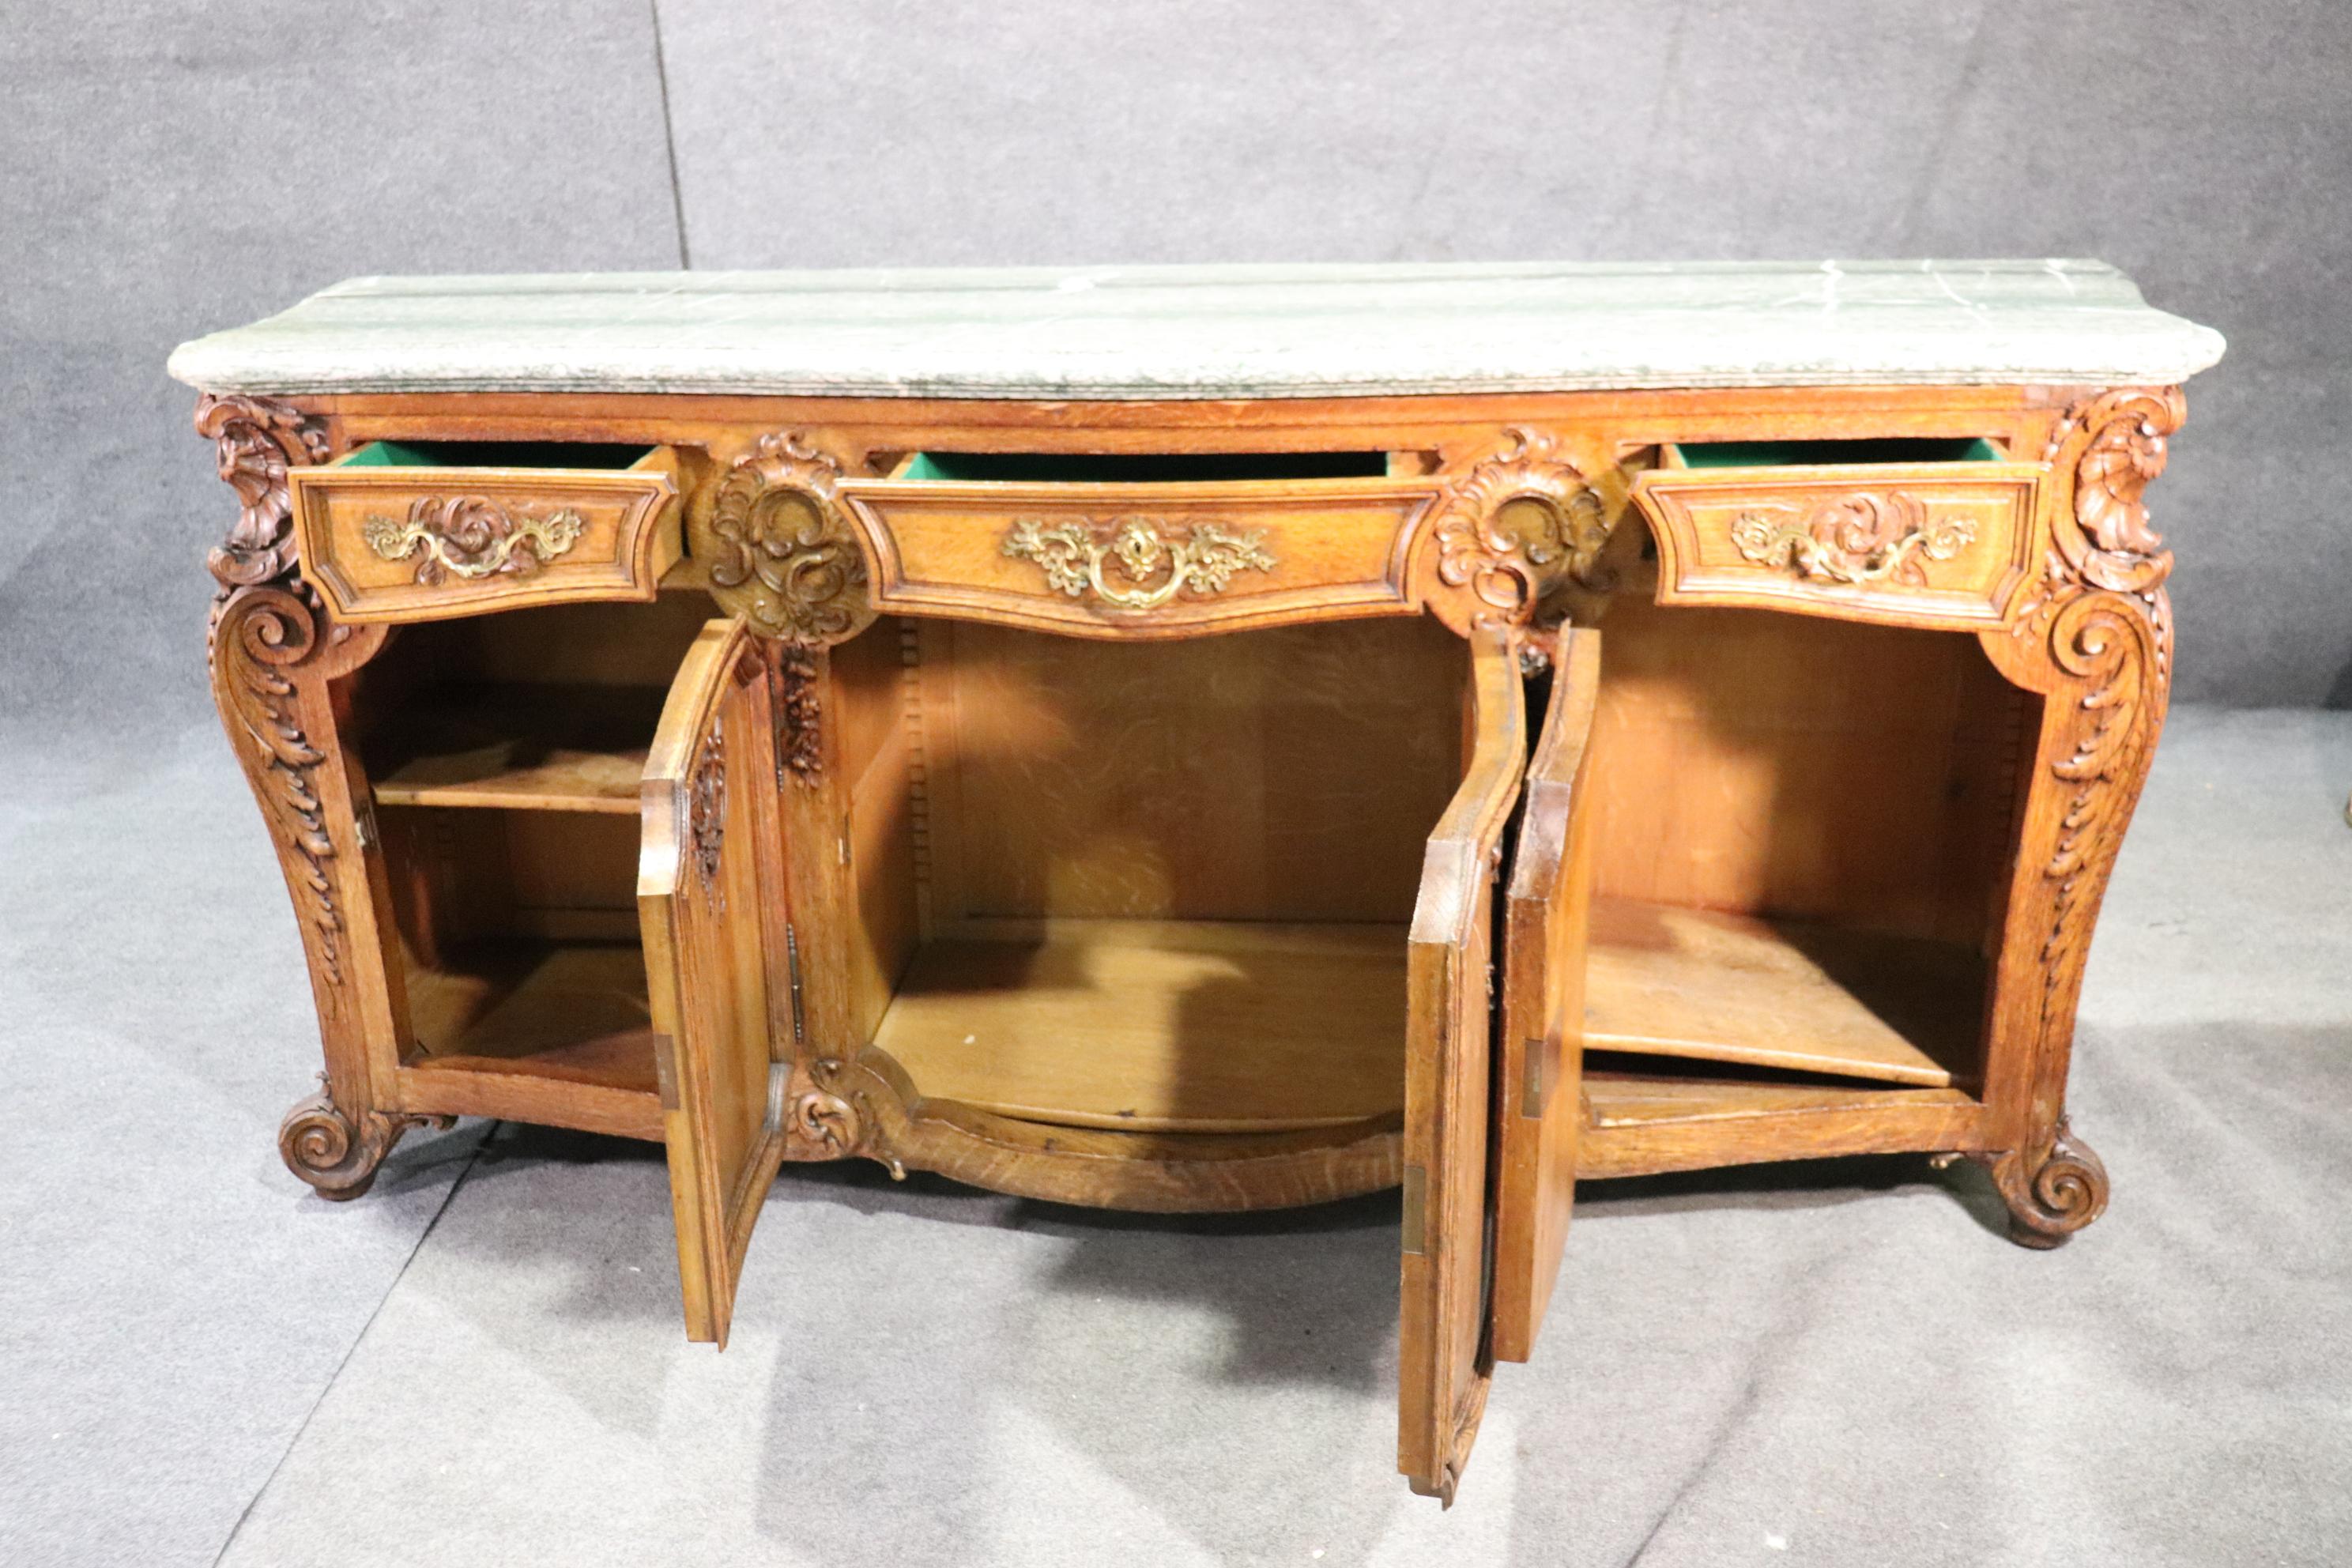 This is one of the finest sideboards we have had in many years. The finest oak carving that can be found on any French piece. The marble is extremely thick and heavy, much thicker than the ones we normally see. The piece is in excellent condition